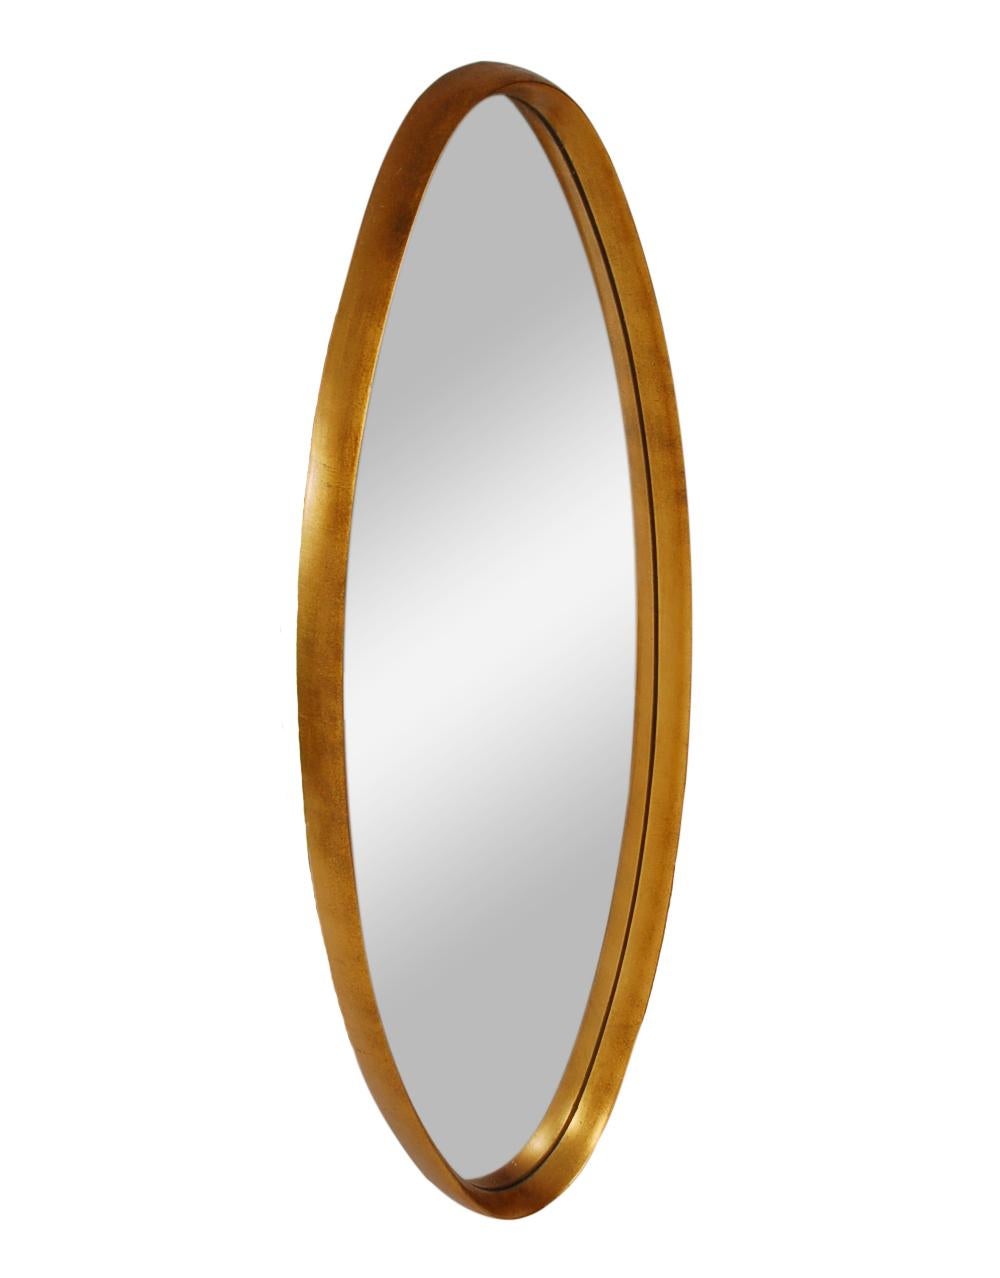 Vintage oval wall mirror from Italy, circa 1960s. It features a thin edge gold gilded wood frame with oval mirror. In very good well cared for condition.